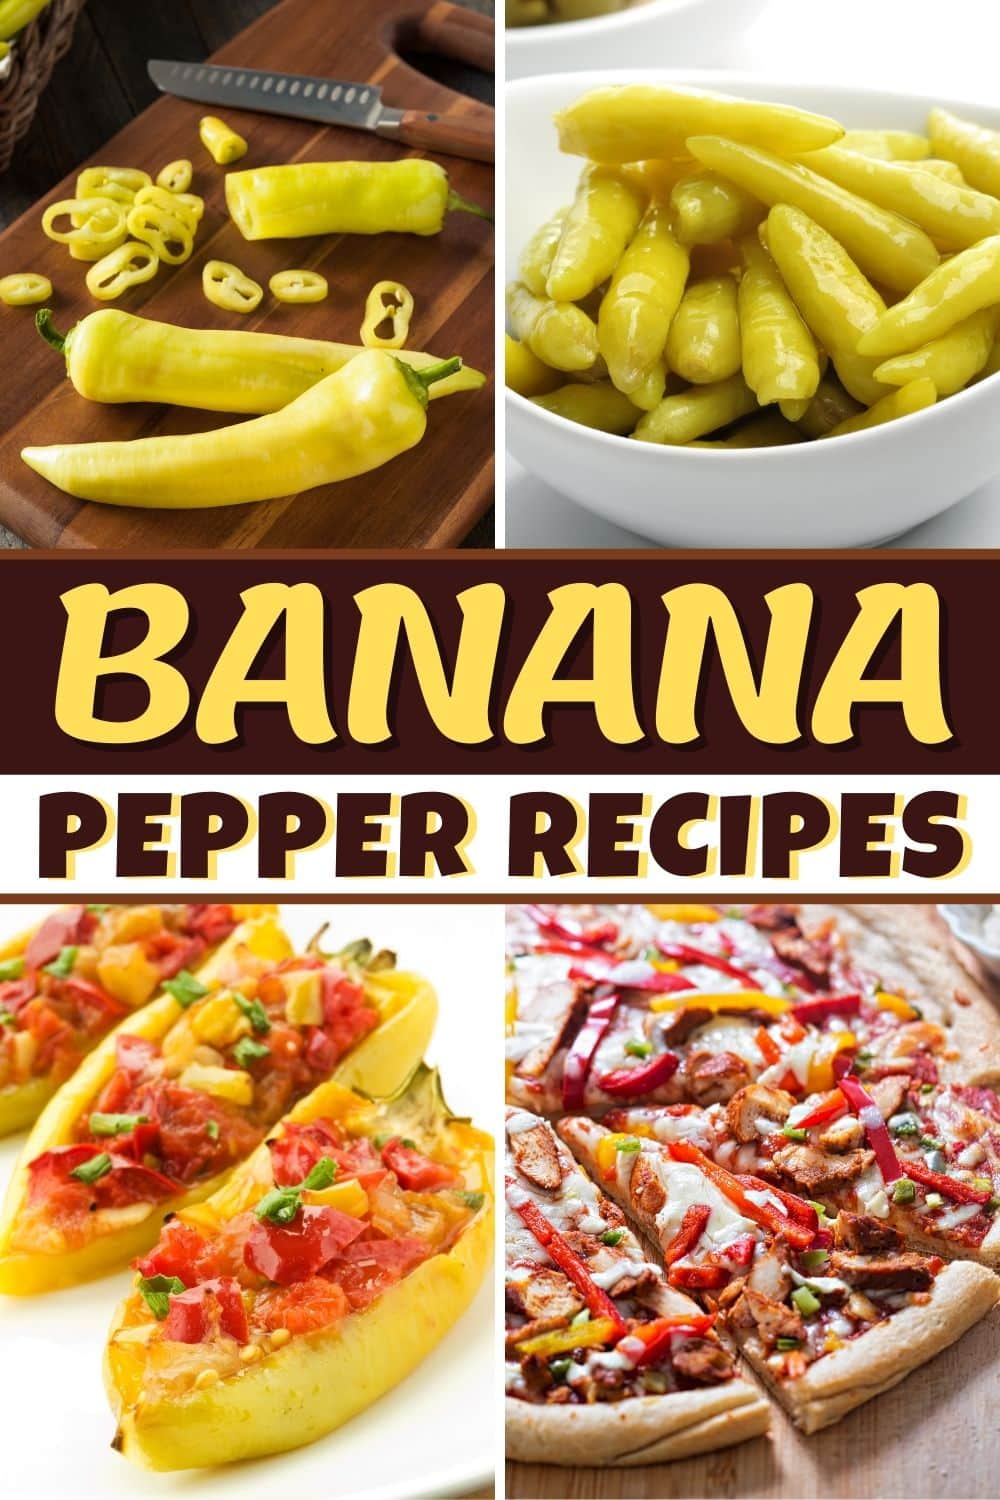 10 Banana Pepper Recipes That Go Beyond Toppings - Insanely Good